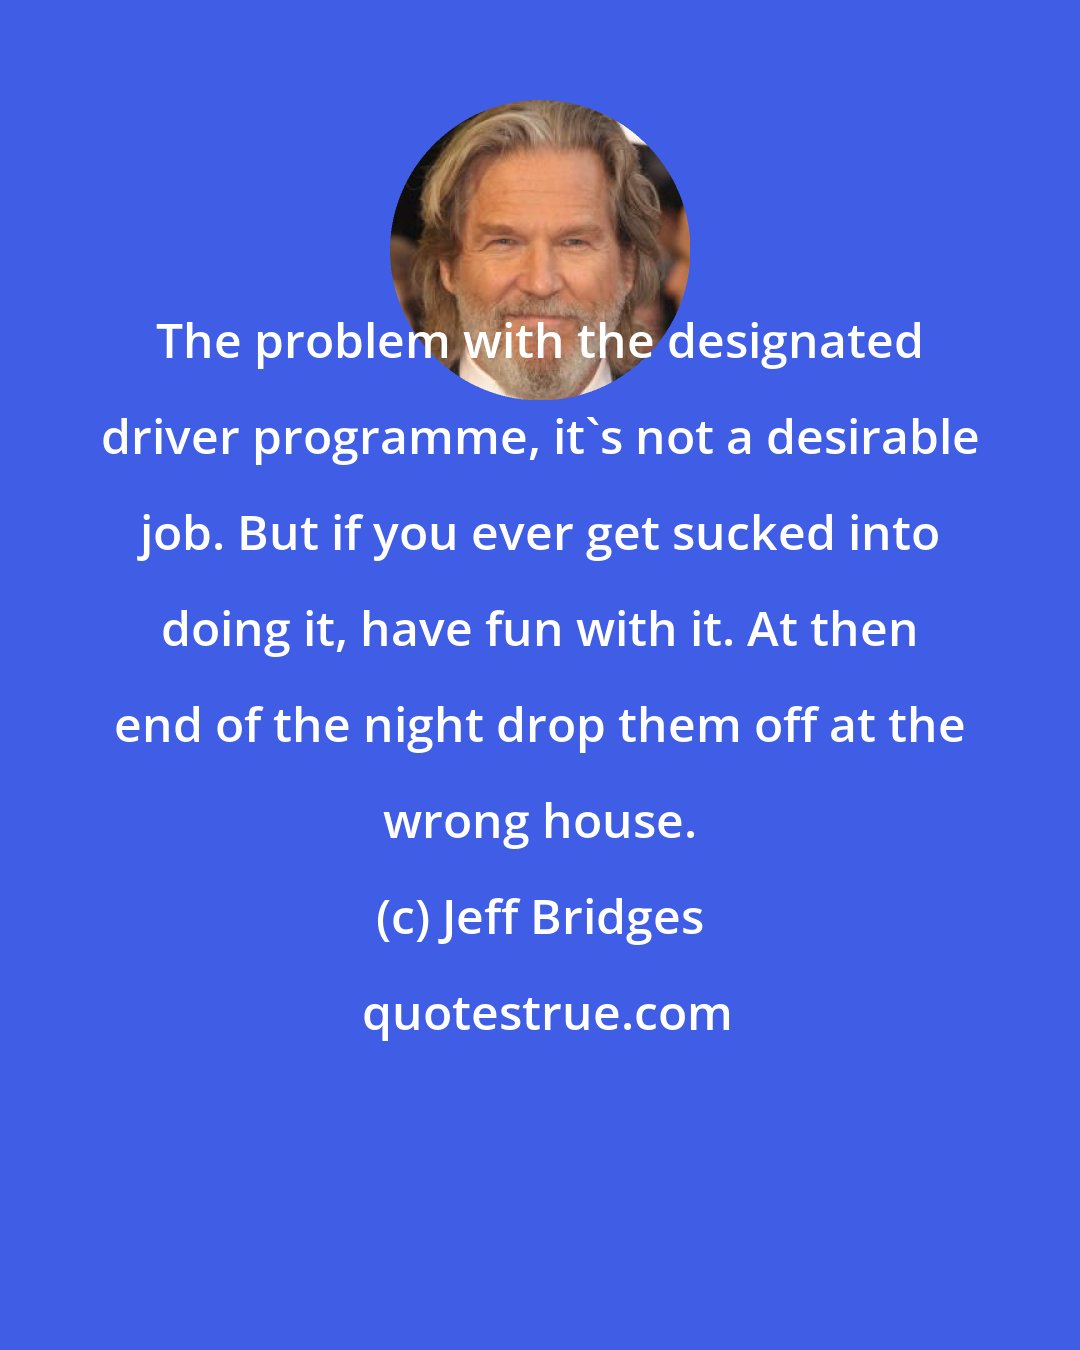 Jeff Bridges: The problem with the designated driver programme, it's not a desirable job. But if you ever get sucked into doing it, have fun with it. At then end of the night drop them off at the wrong house.